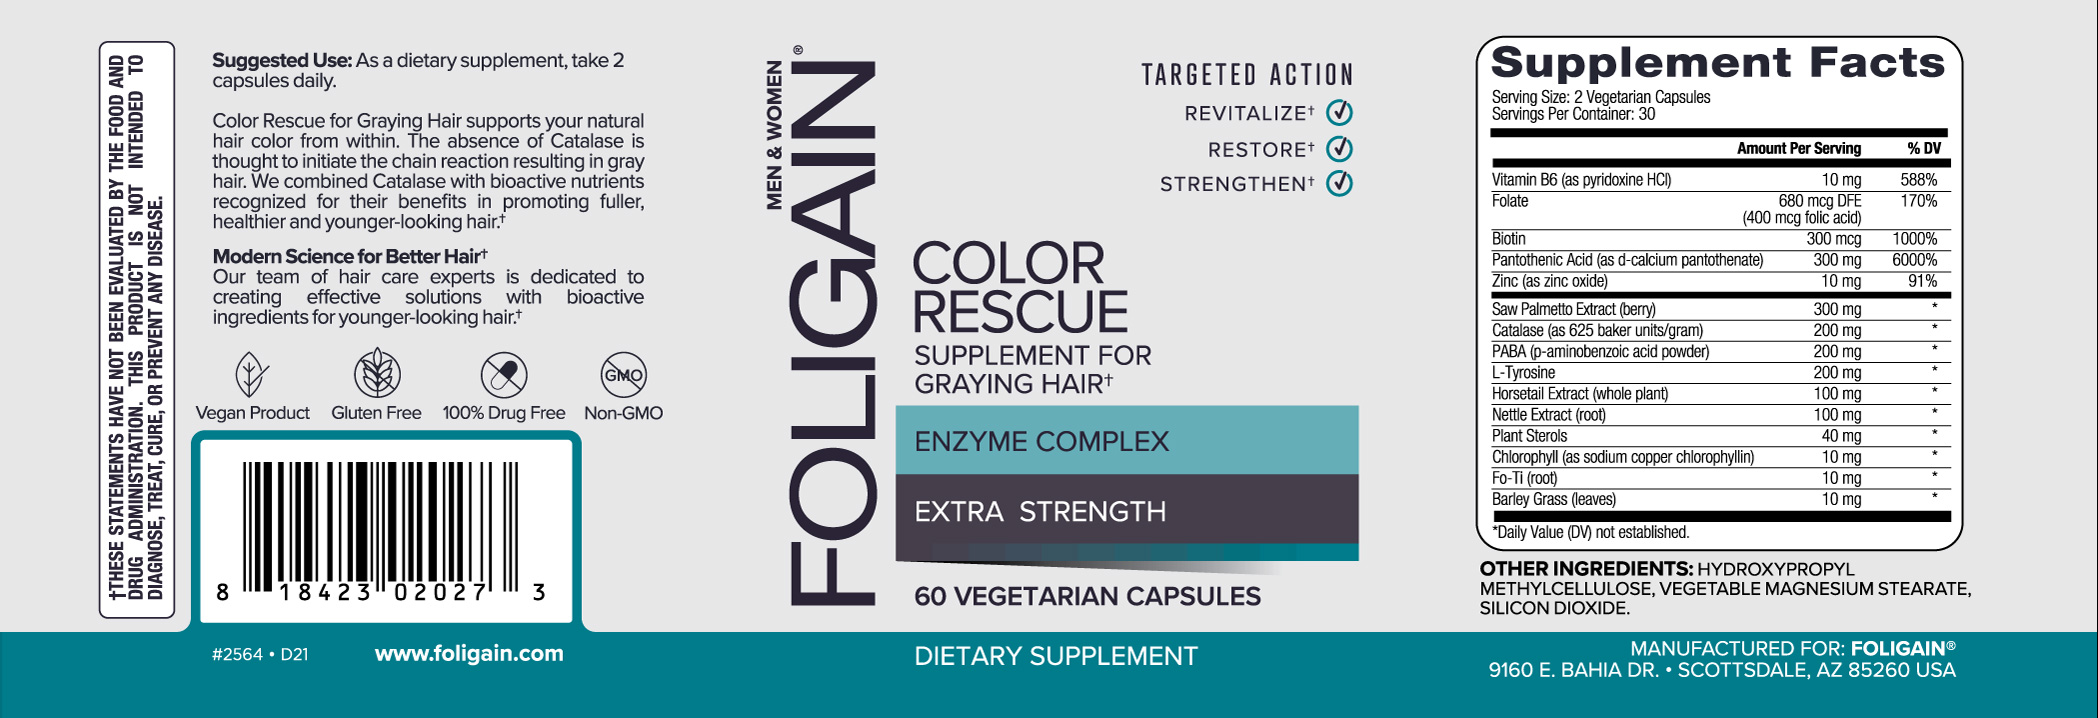 FOLIGAIN Color Rescue Supplement For Graying Hair